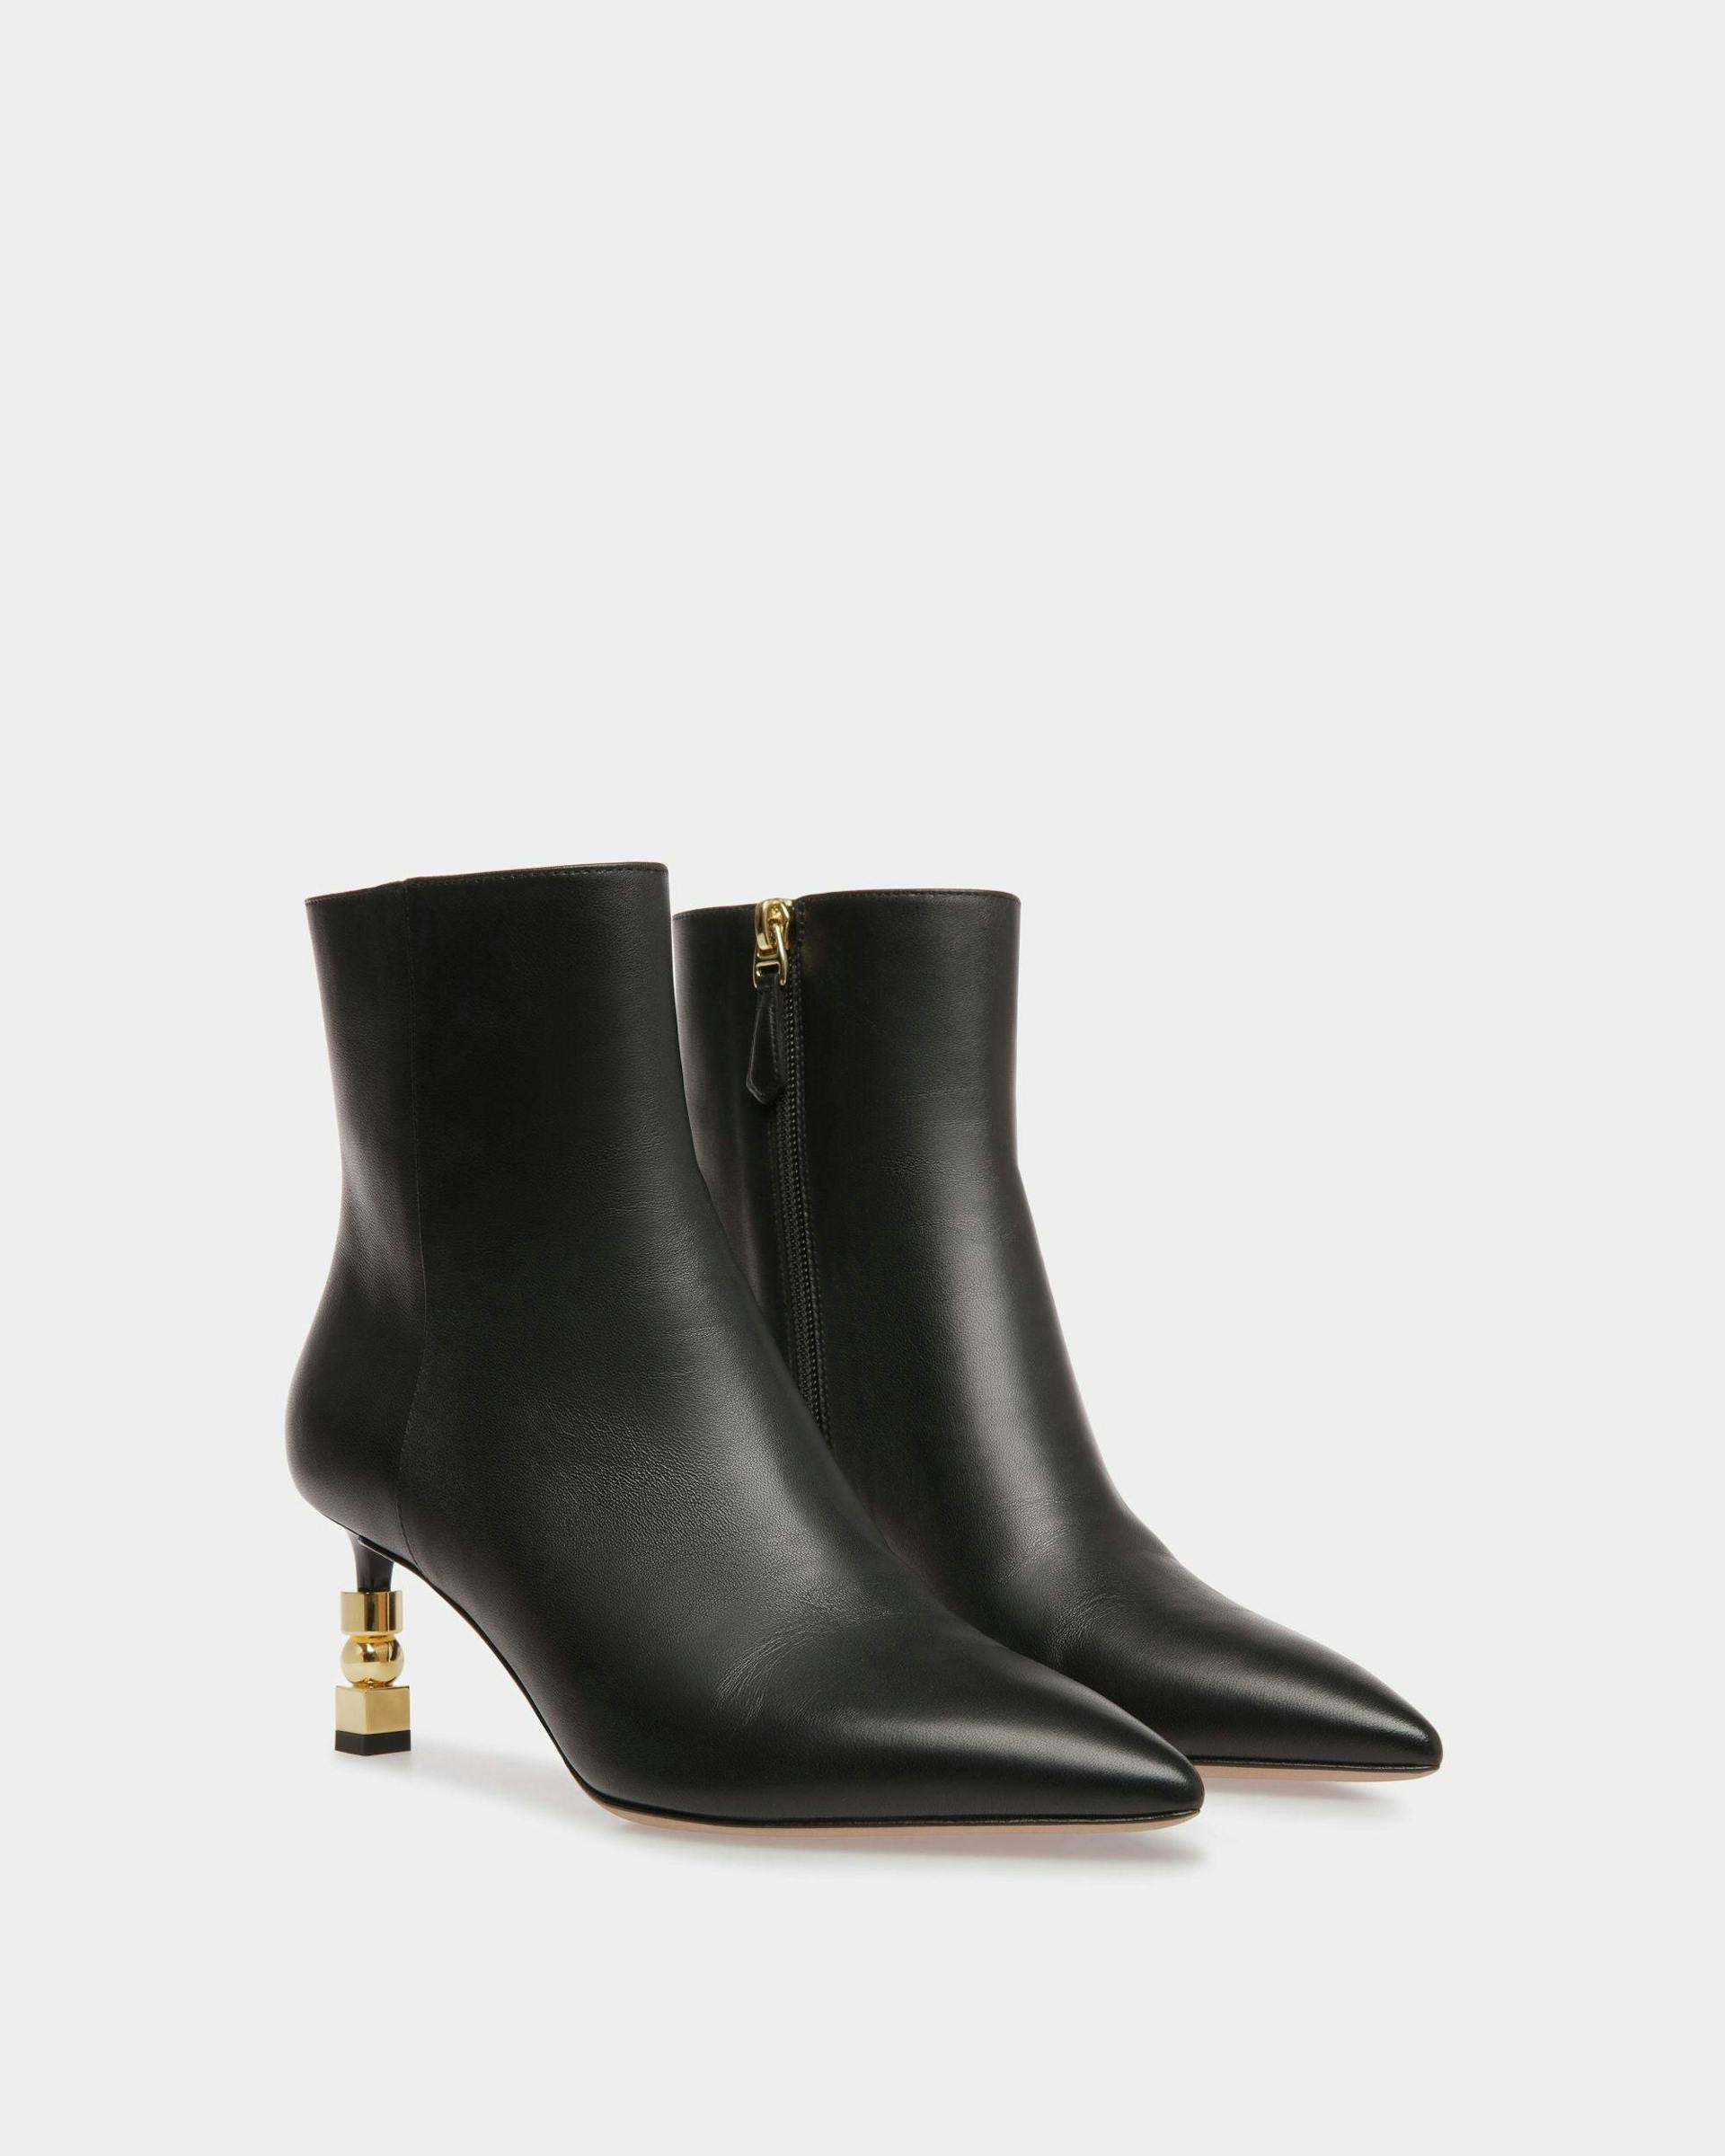 Women's Block Booties In Black Leather | Bally | Still Life 3/4 Front